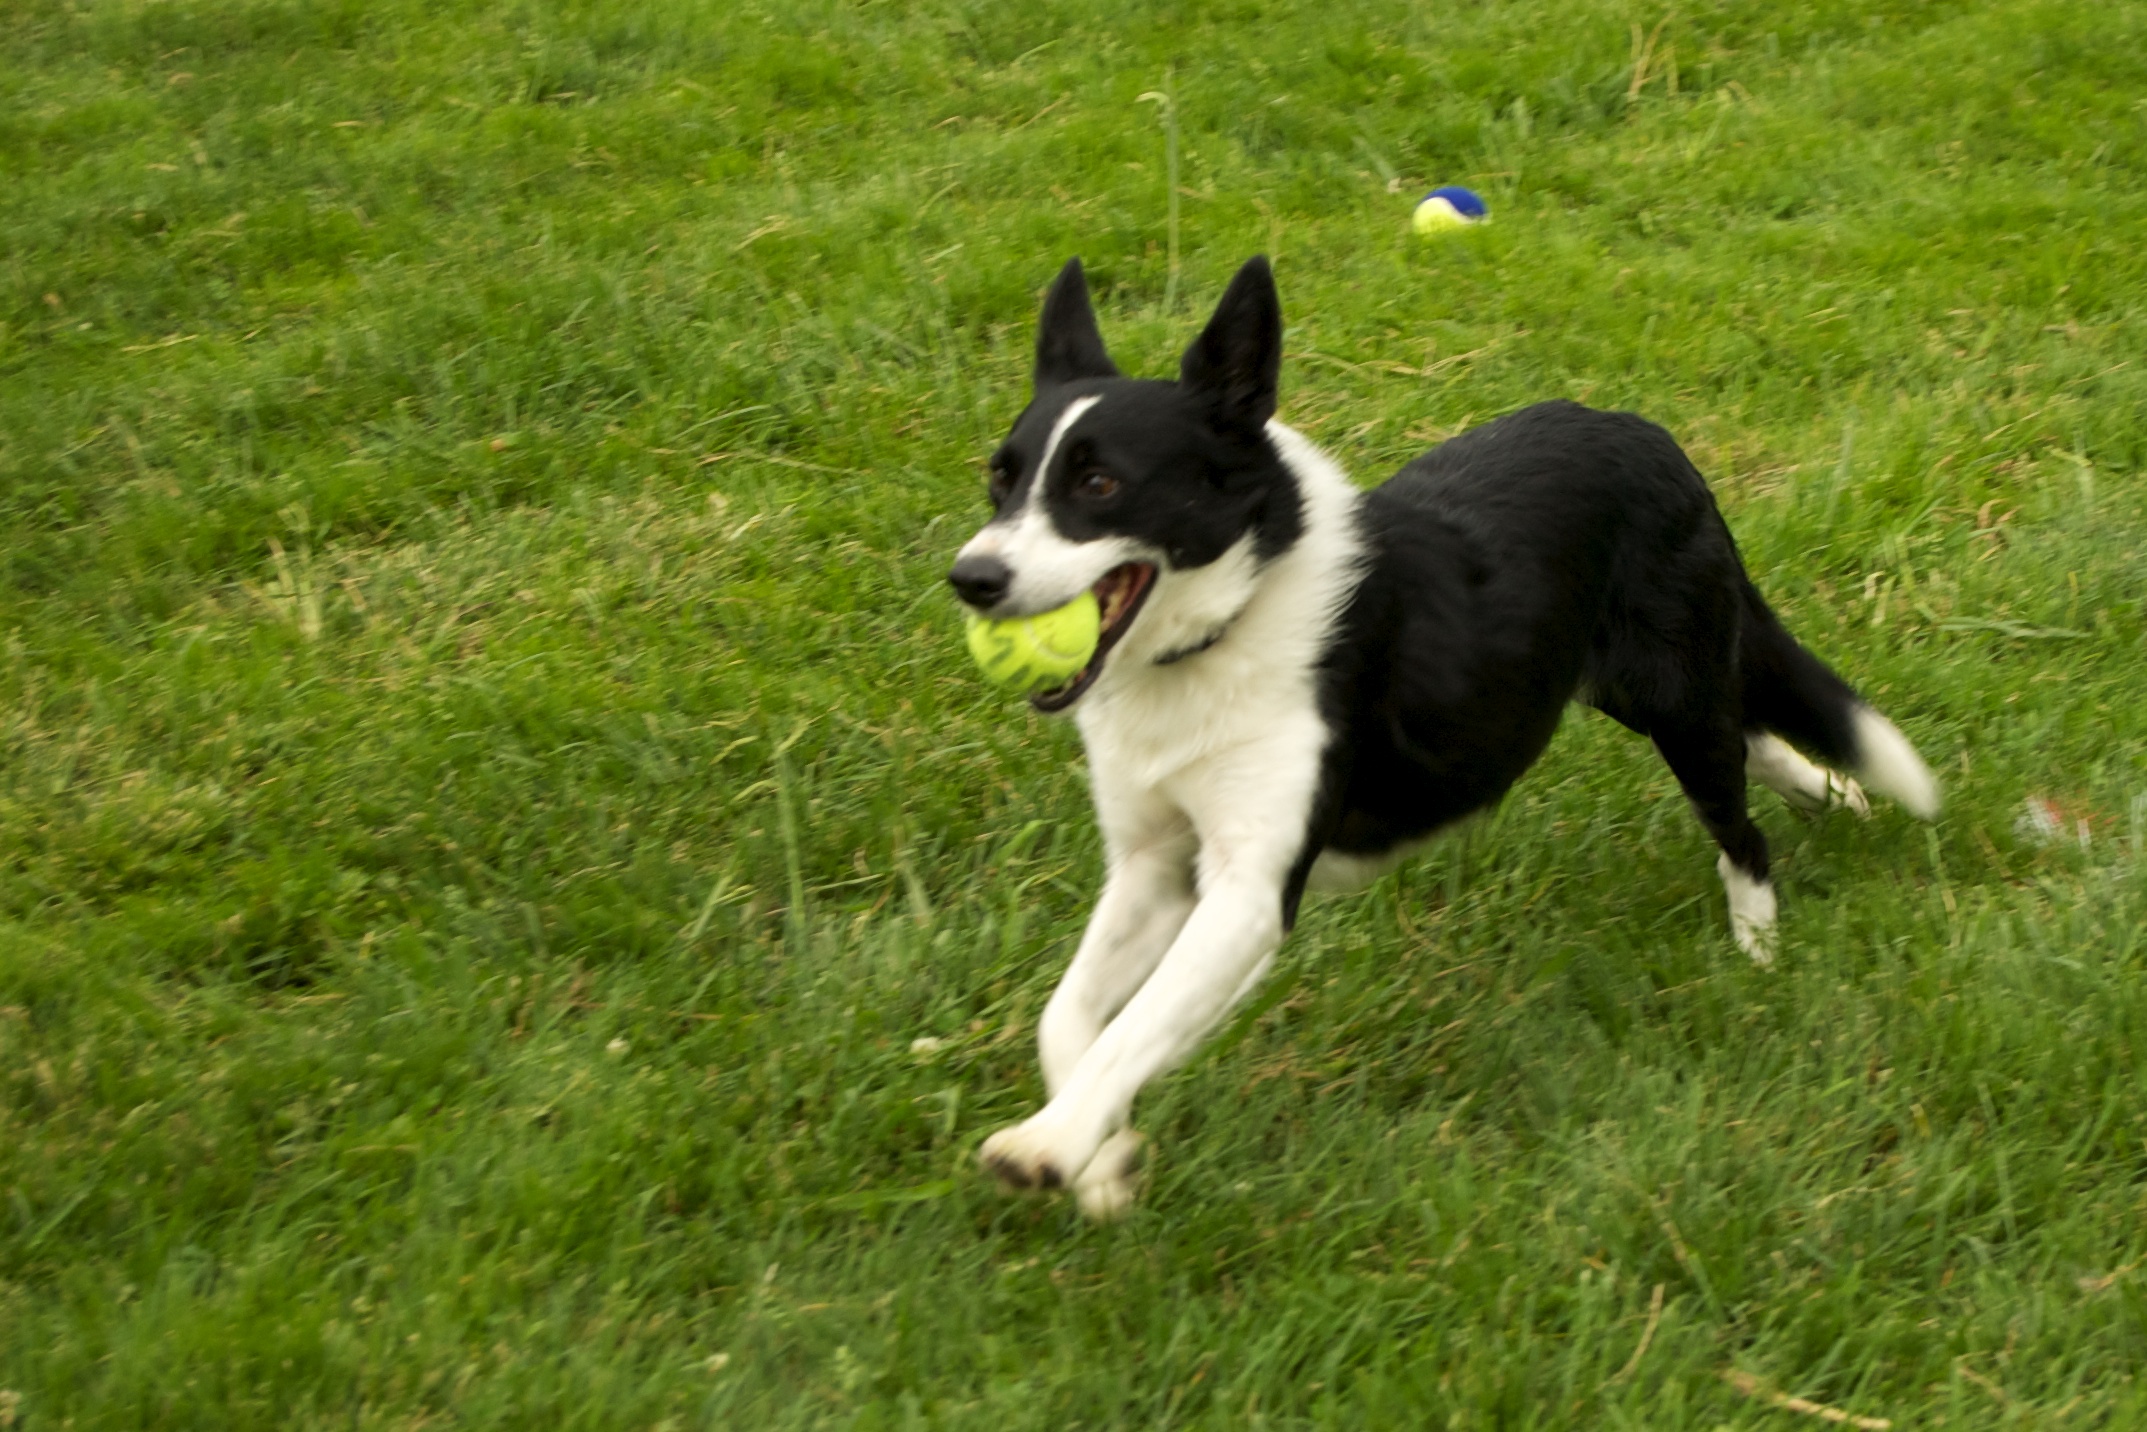 a black and white dog holding a tennis ball